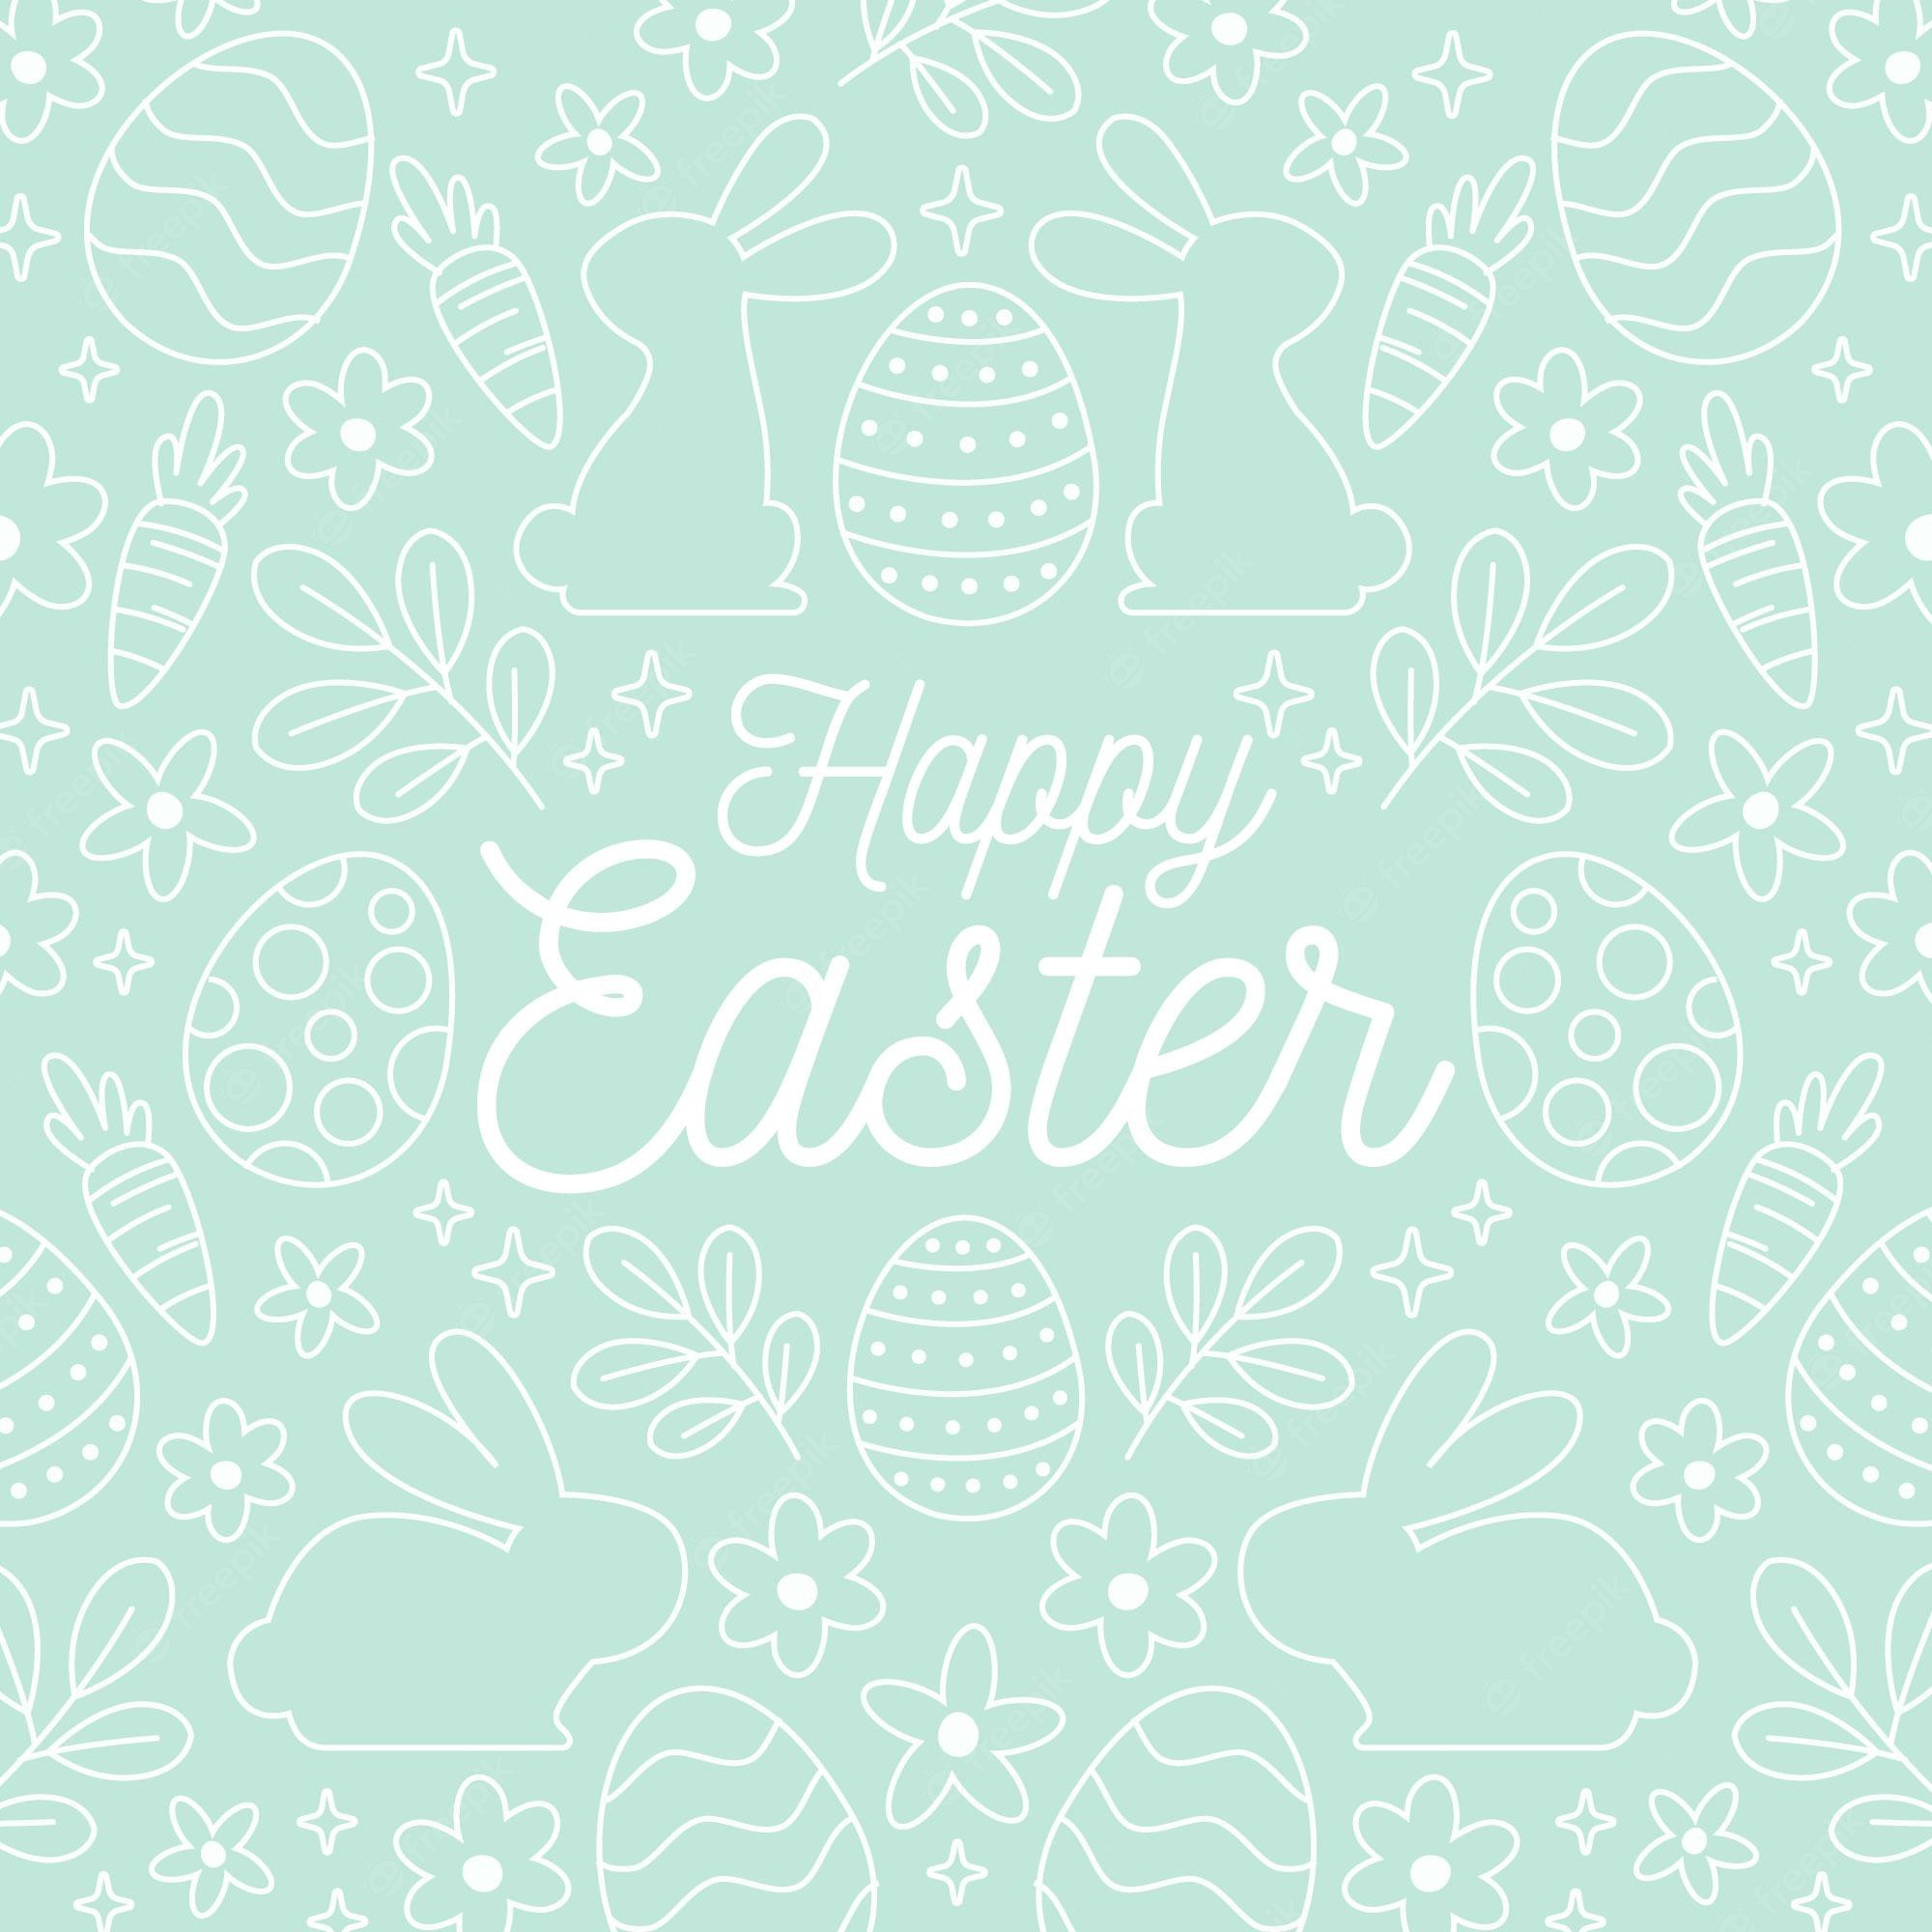 Christian Easter Pictures Wallpapers